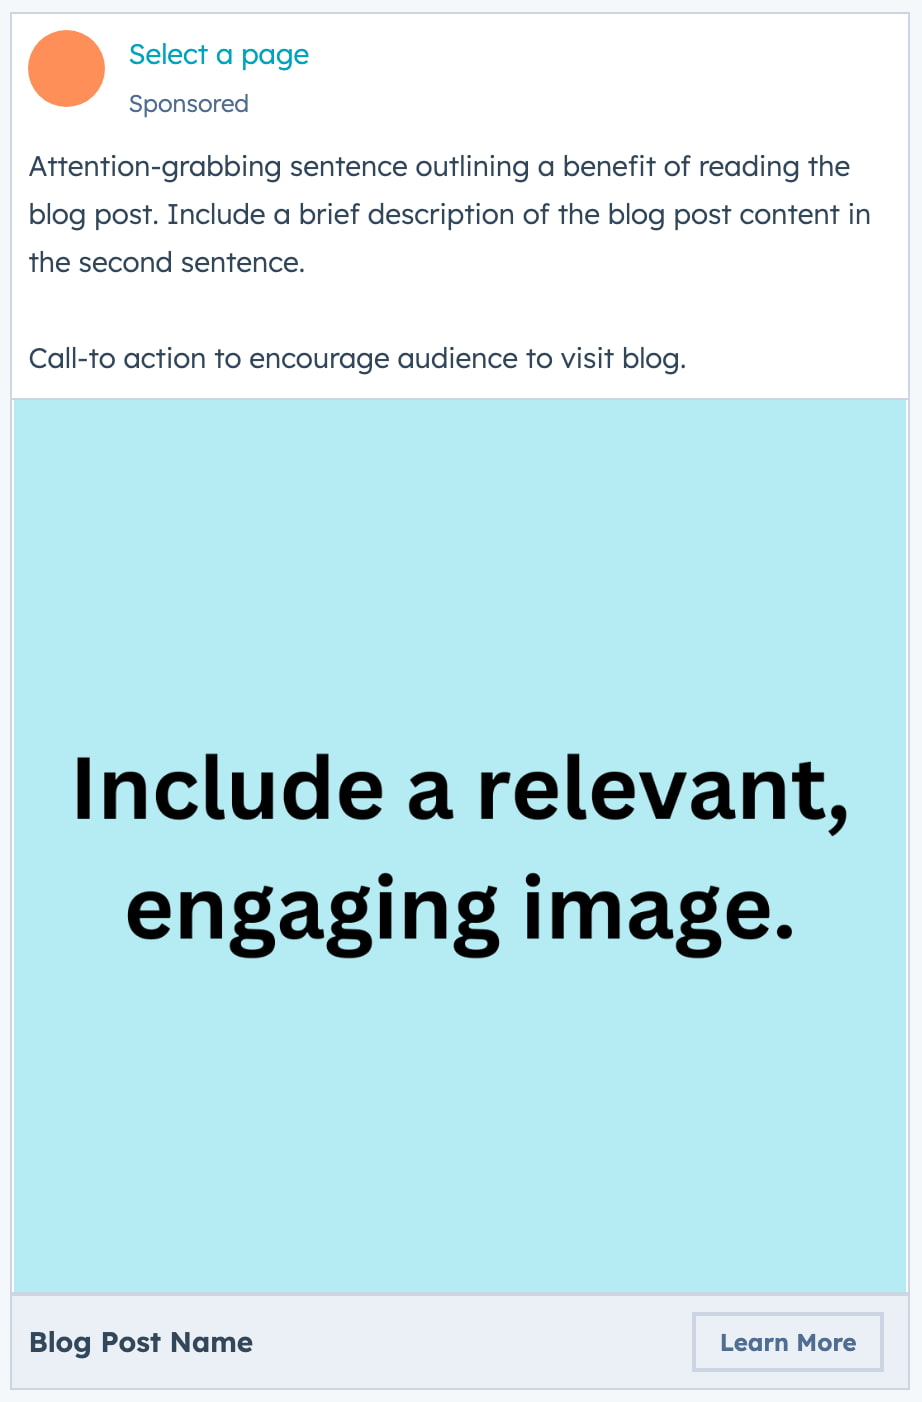 Paid social copy should include an attention grabbing intro, a CTA, and a relevant image